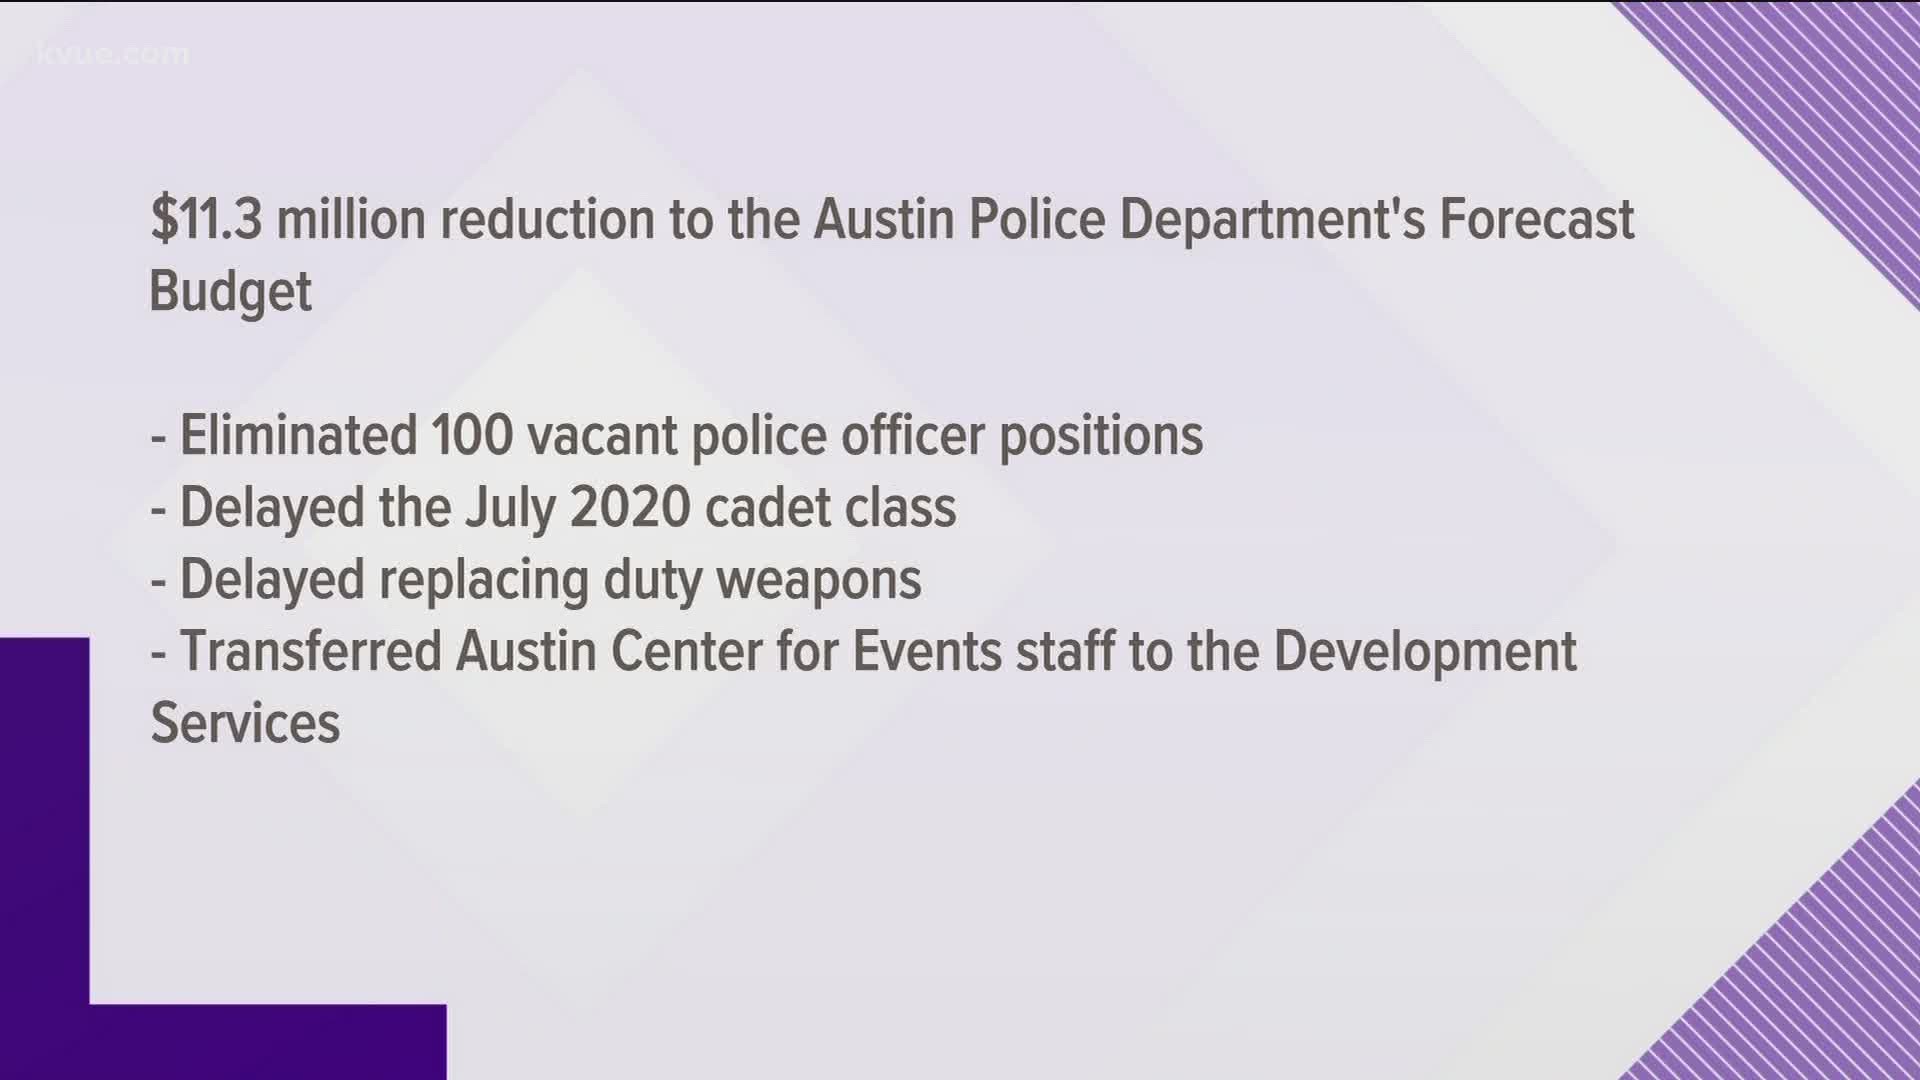 City Manager Spencer Cronk's budget plan includes tax hikes and millions cut from the Austin Police Department. Jenni Lee breaks it down.